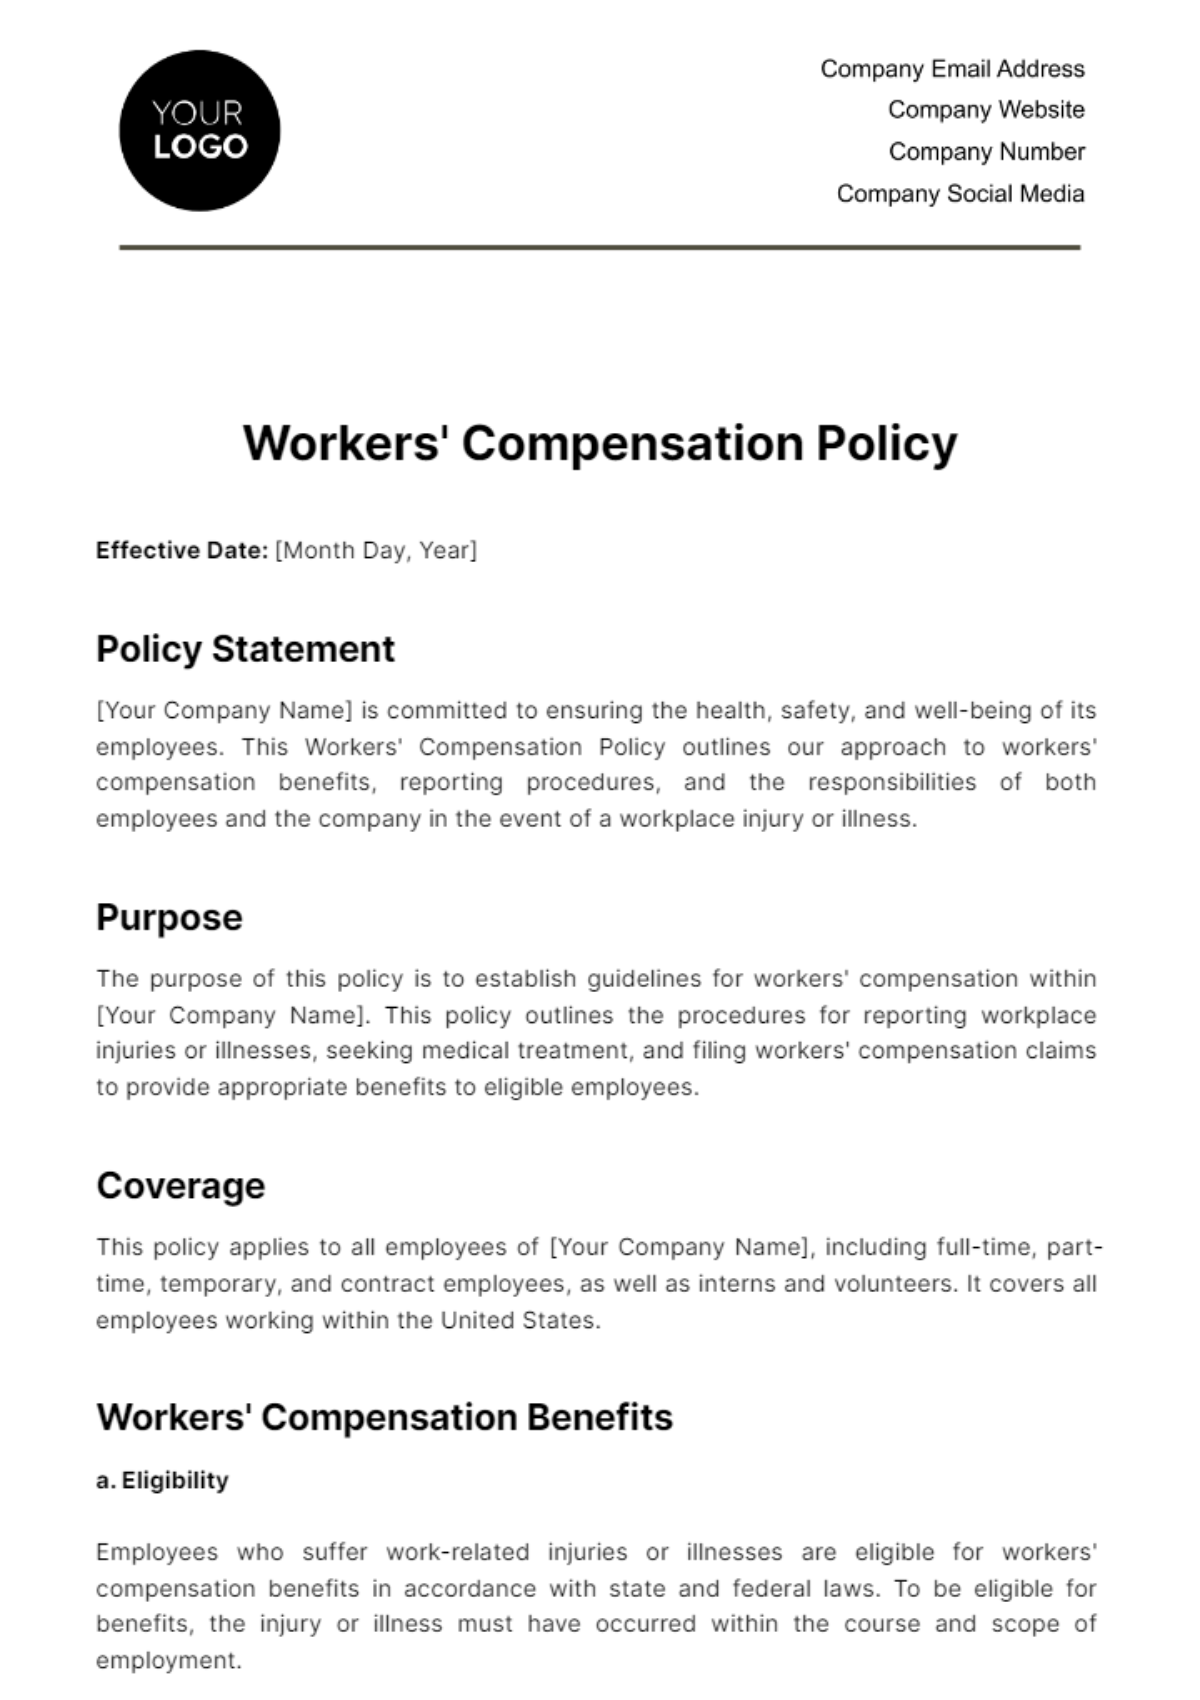 Workers' Compensation Policy HR Template